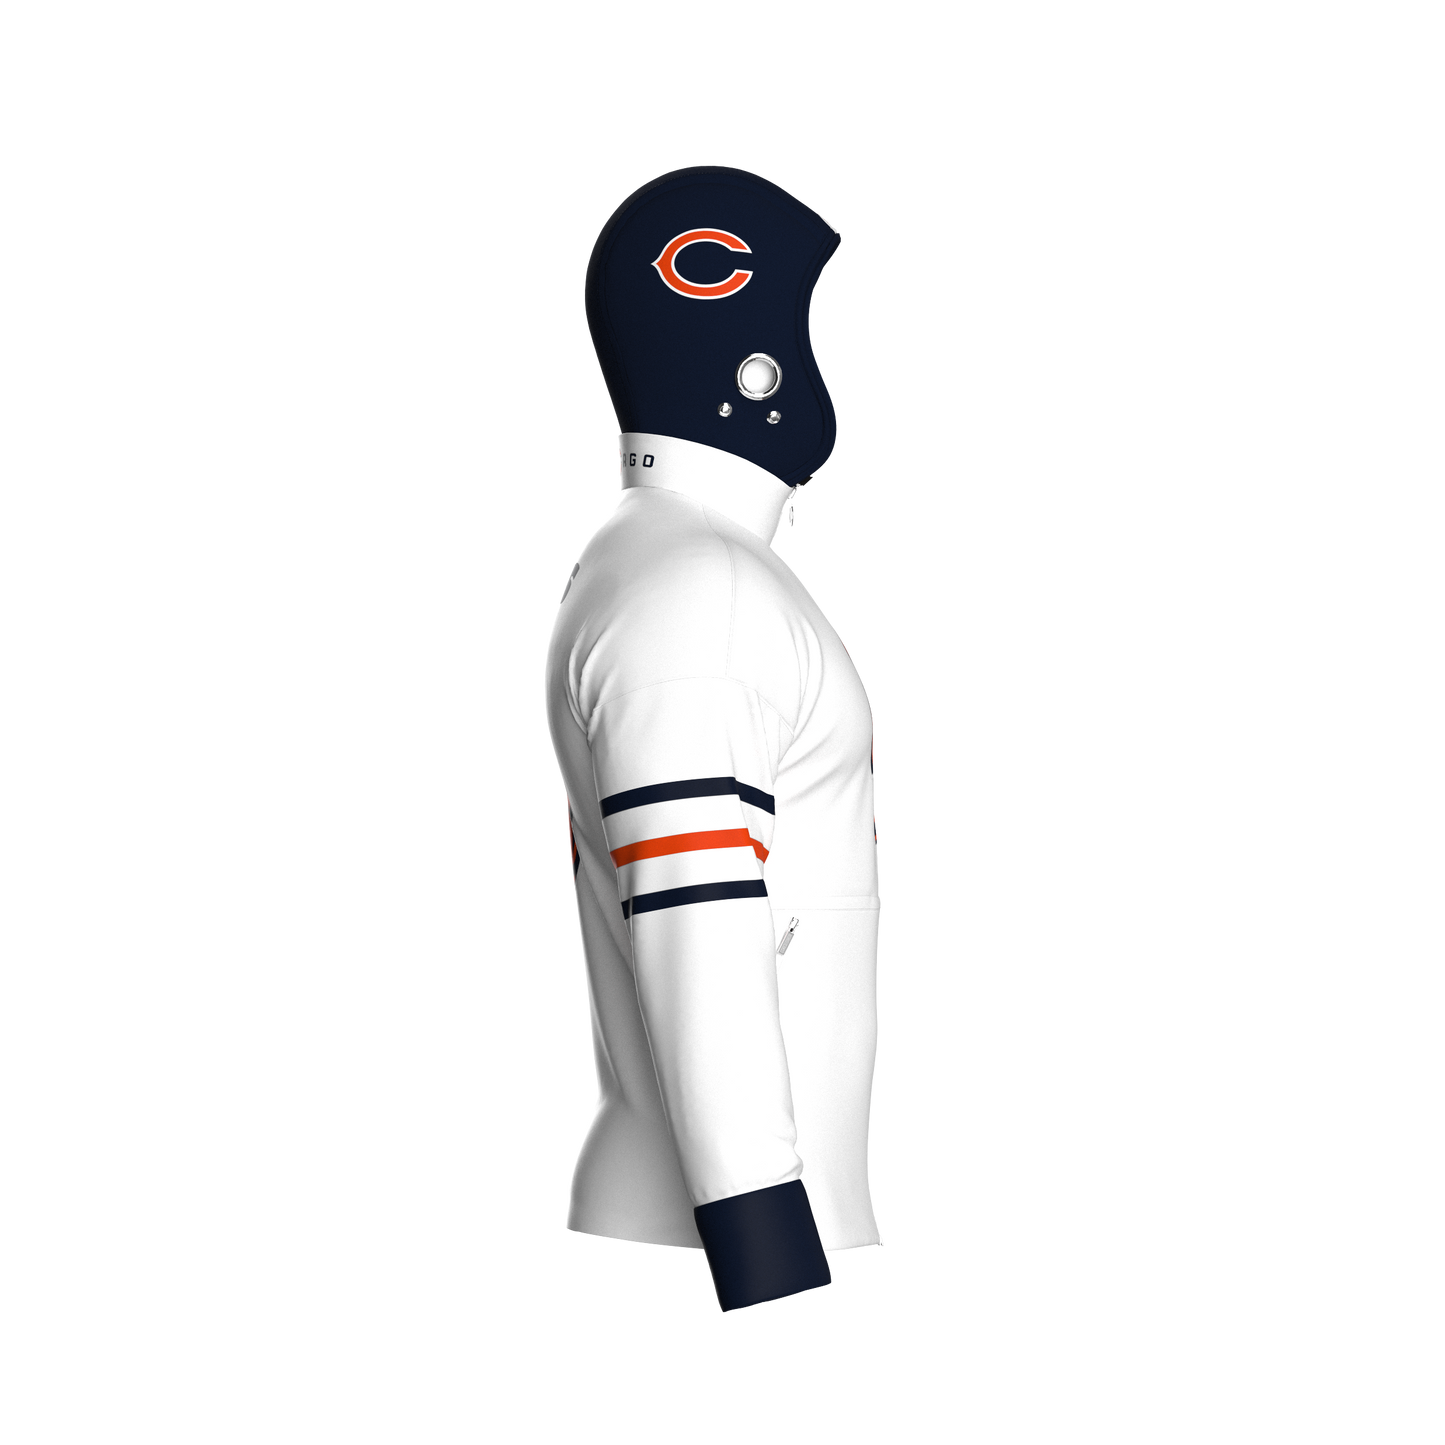 Chicago Bears Away Zip-Up (youth)